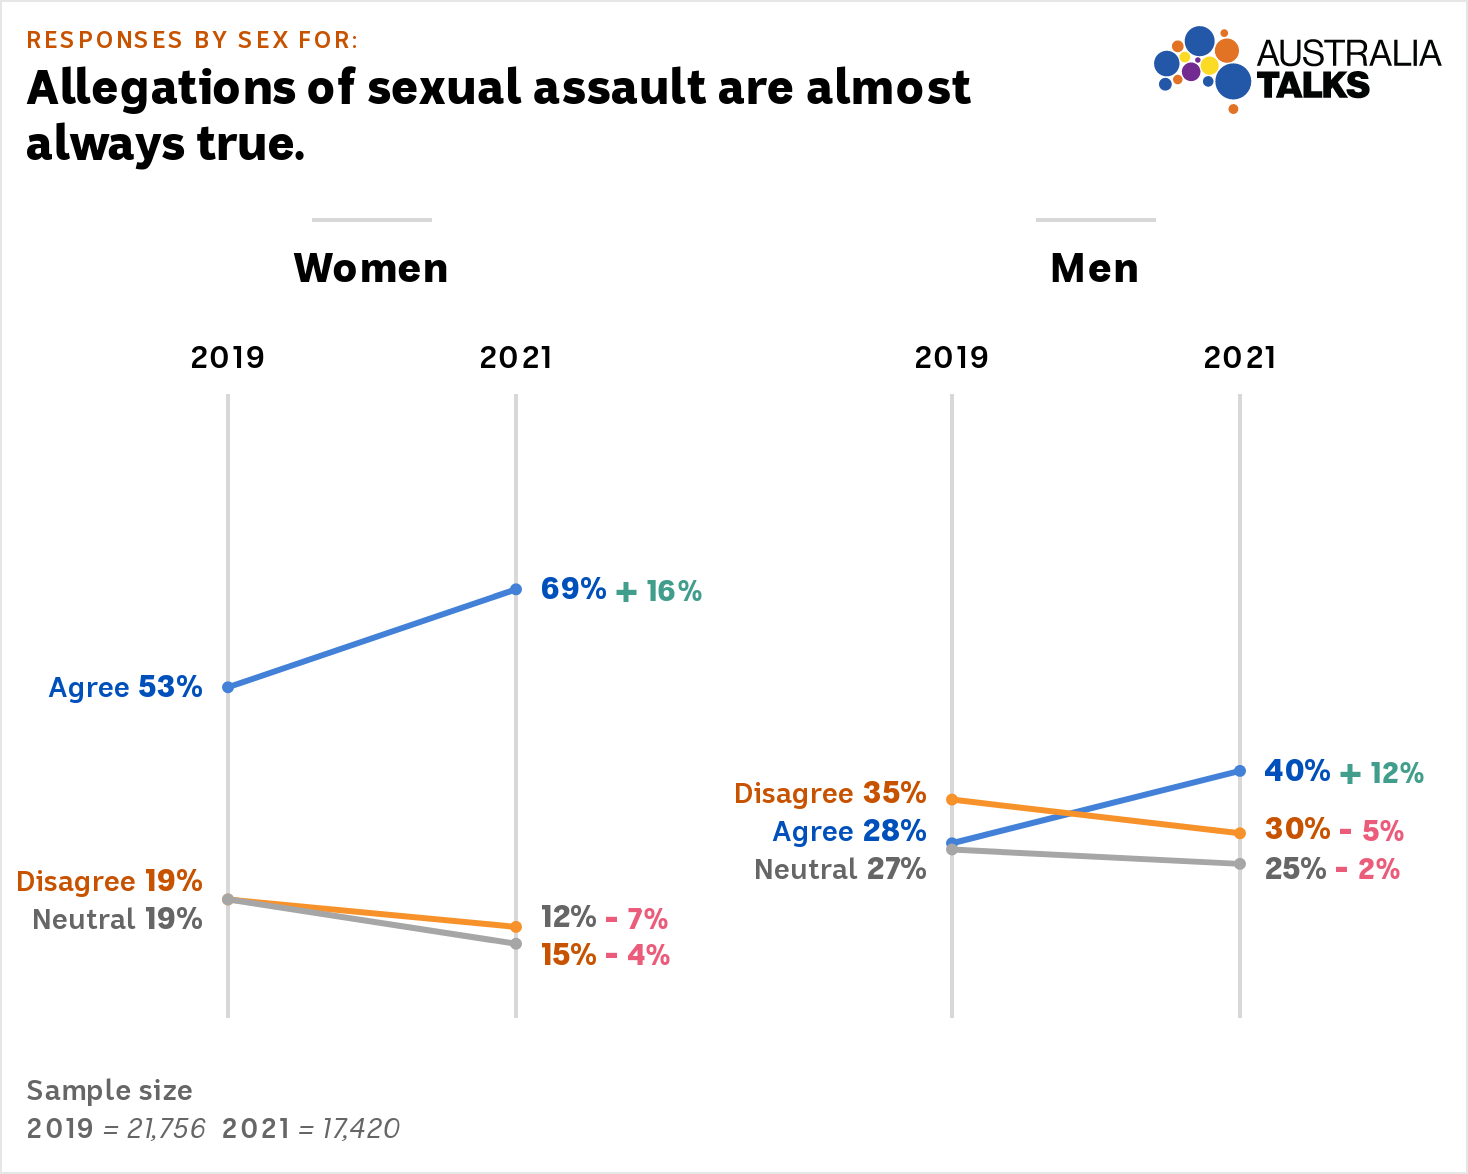 Side by side graphs show the change in agree/disagree/neutral for men and women from 2019 to 2021